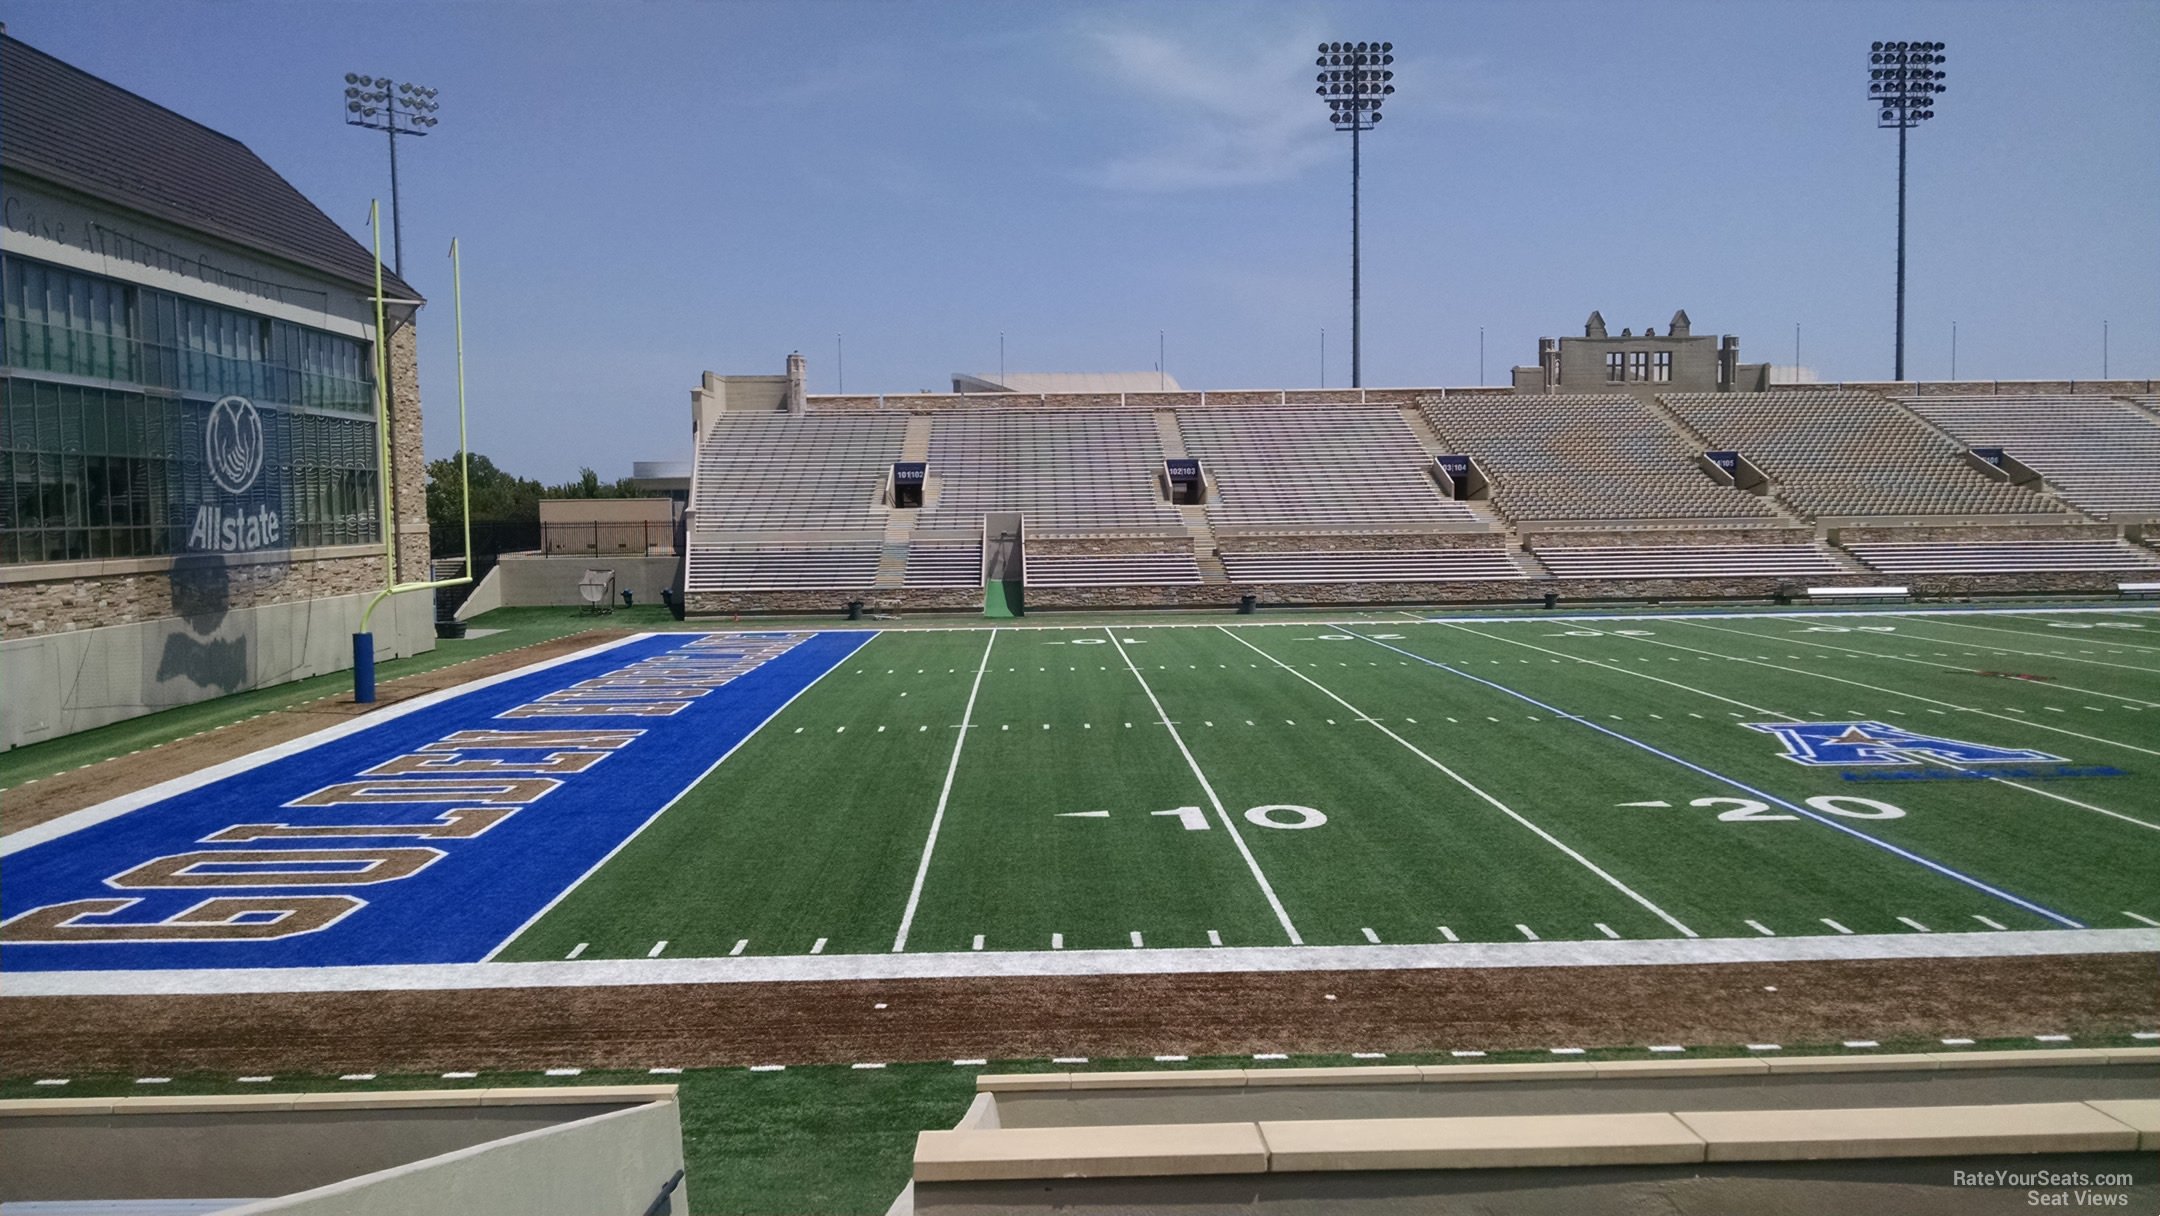 section 120, row 16 seat view  - h.a. chapman stadium